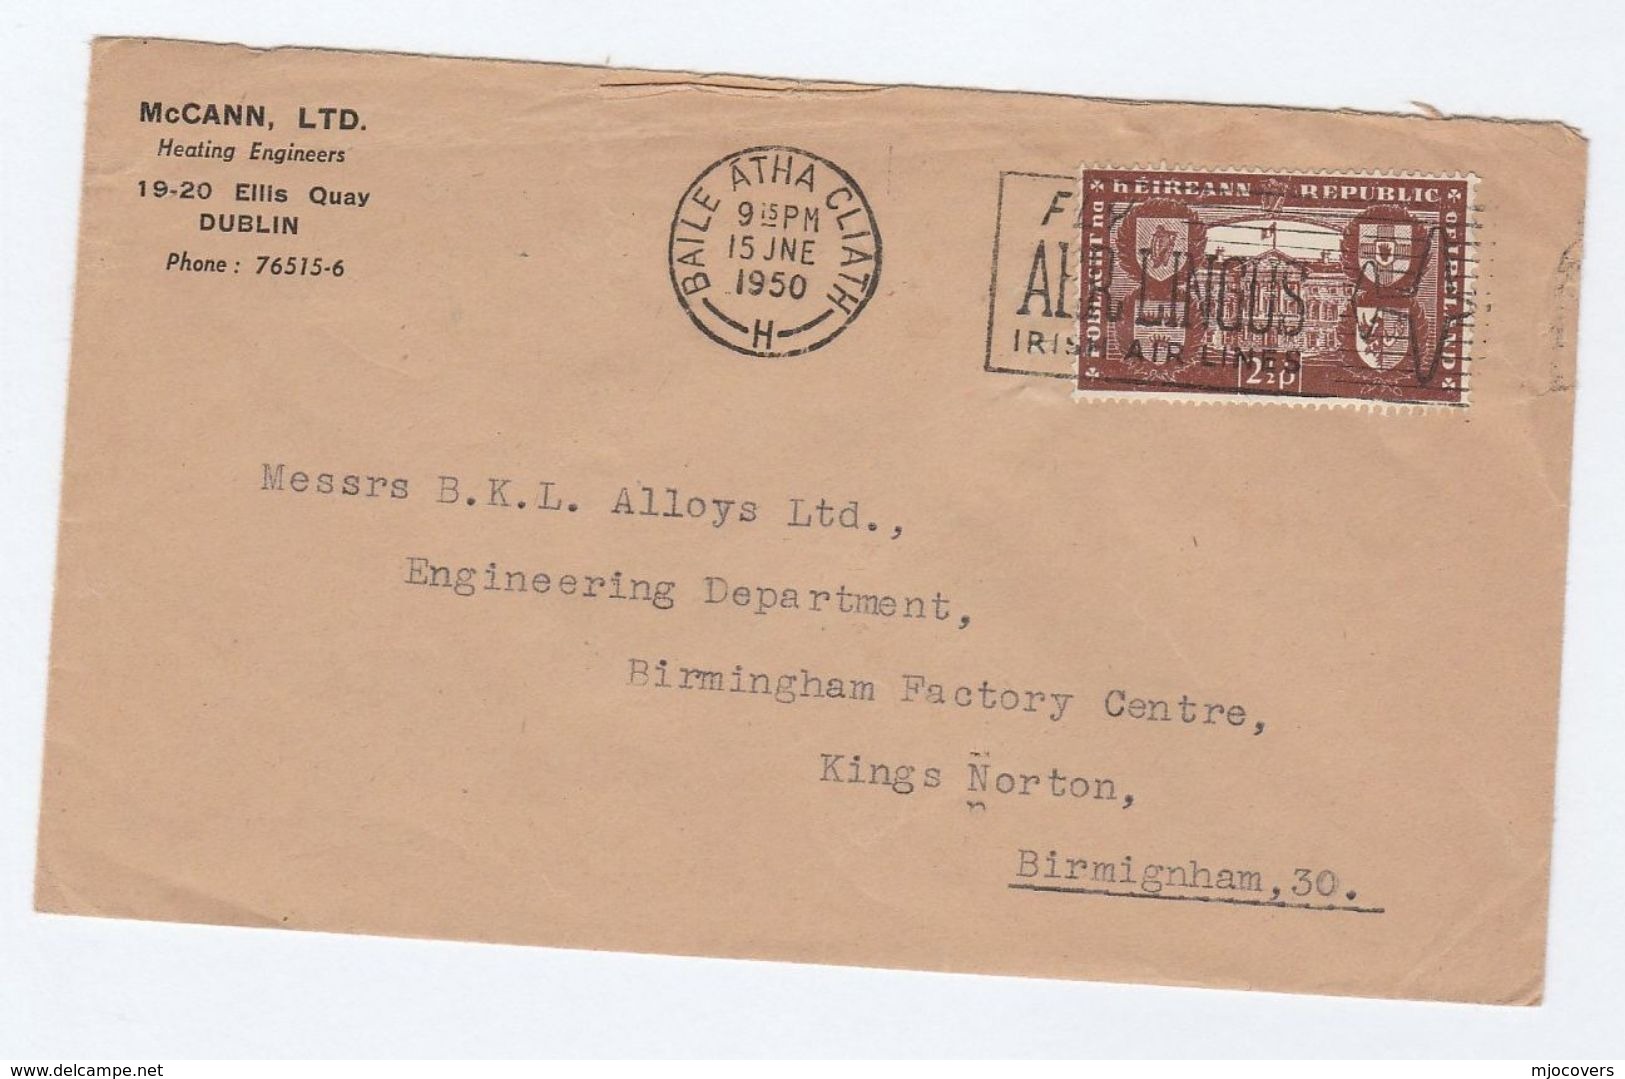 1950 IRELAND COVER SLOGAN Pmk FLY AER LINGUS IRISH AIR LINES From McCann Ltd Dublin To GB Stamps Aviation - Covers & Documents